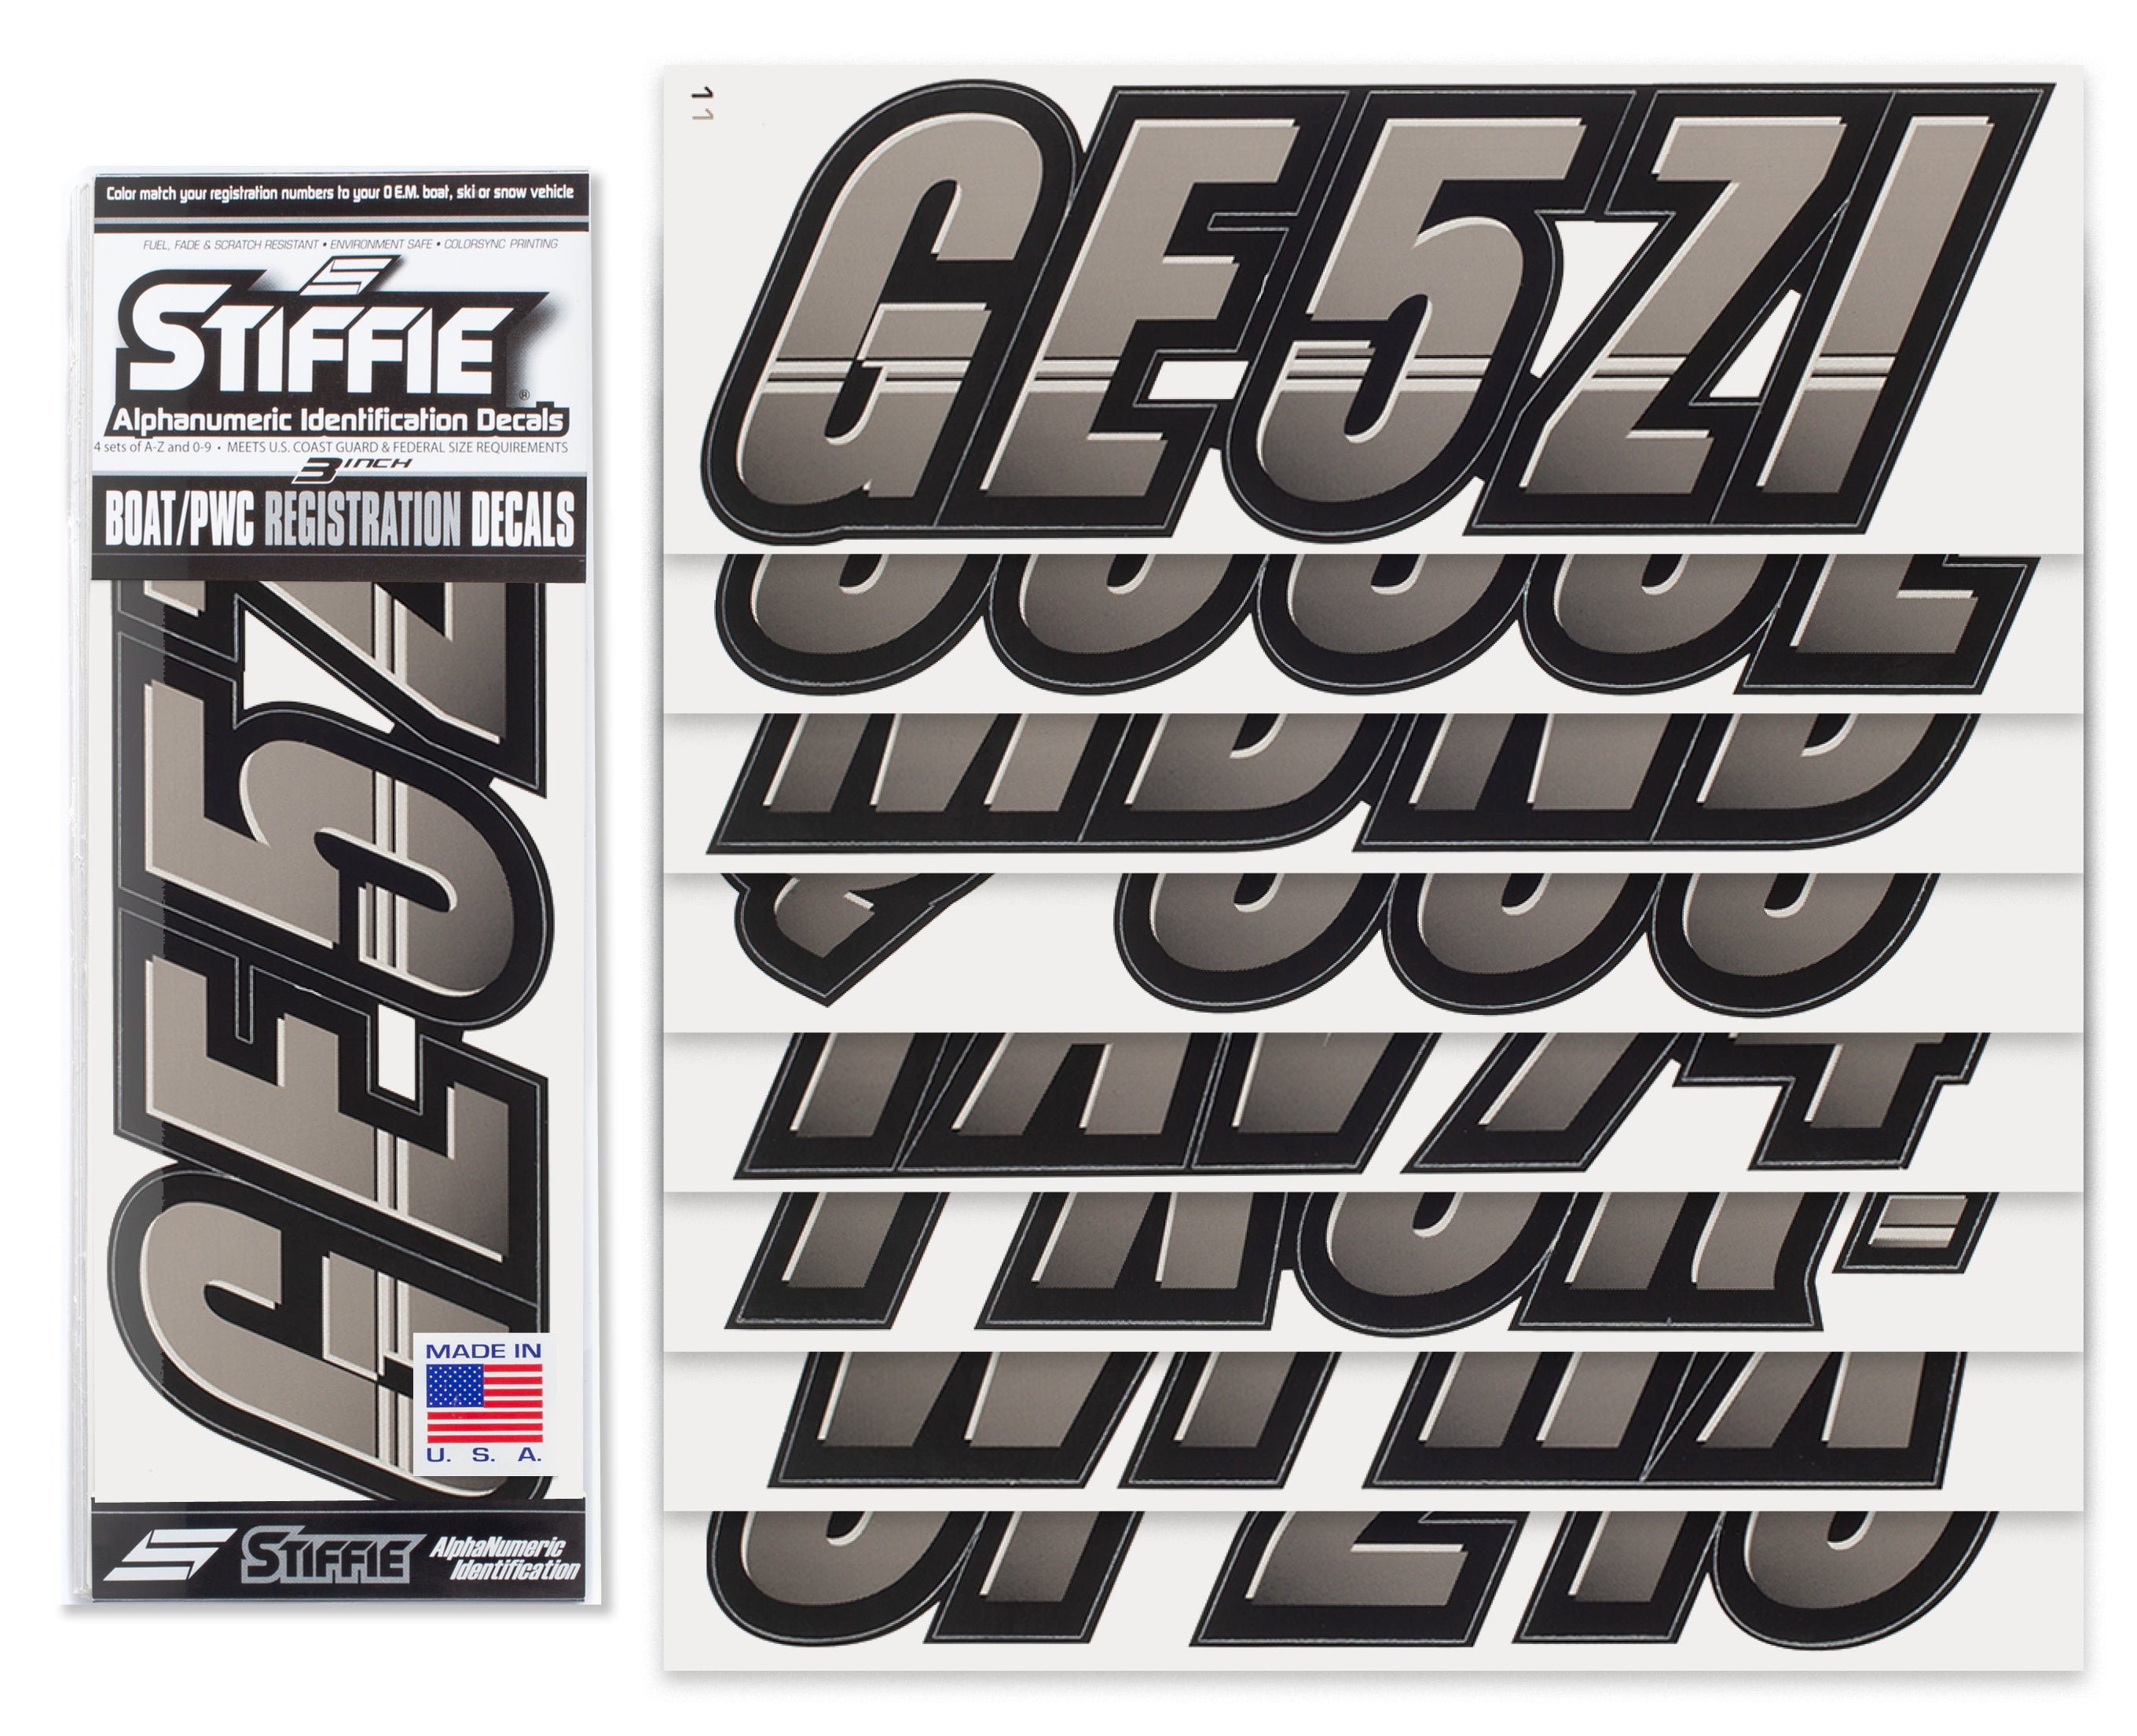 STIFFIE Techtron Charcoal/Black 3" Alpha-Numeric Registration Identification Numbers Stickers Decals for Boats & Personal Watercraft